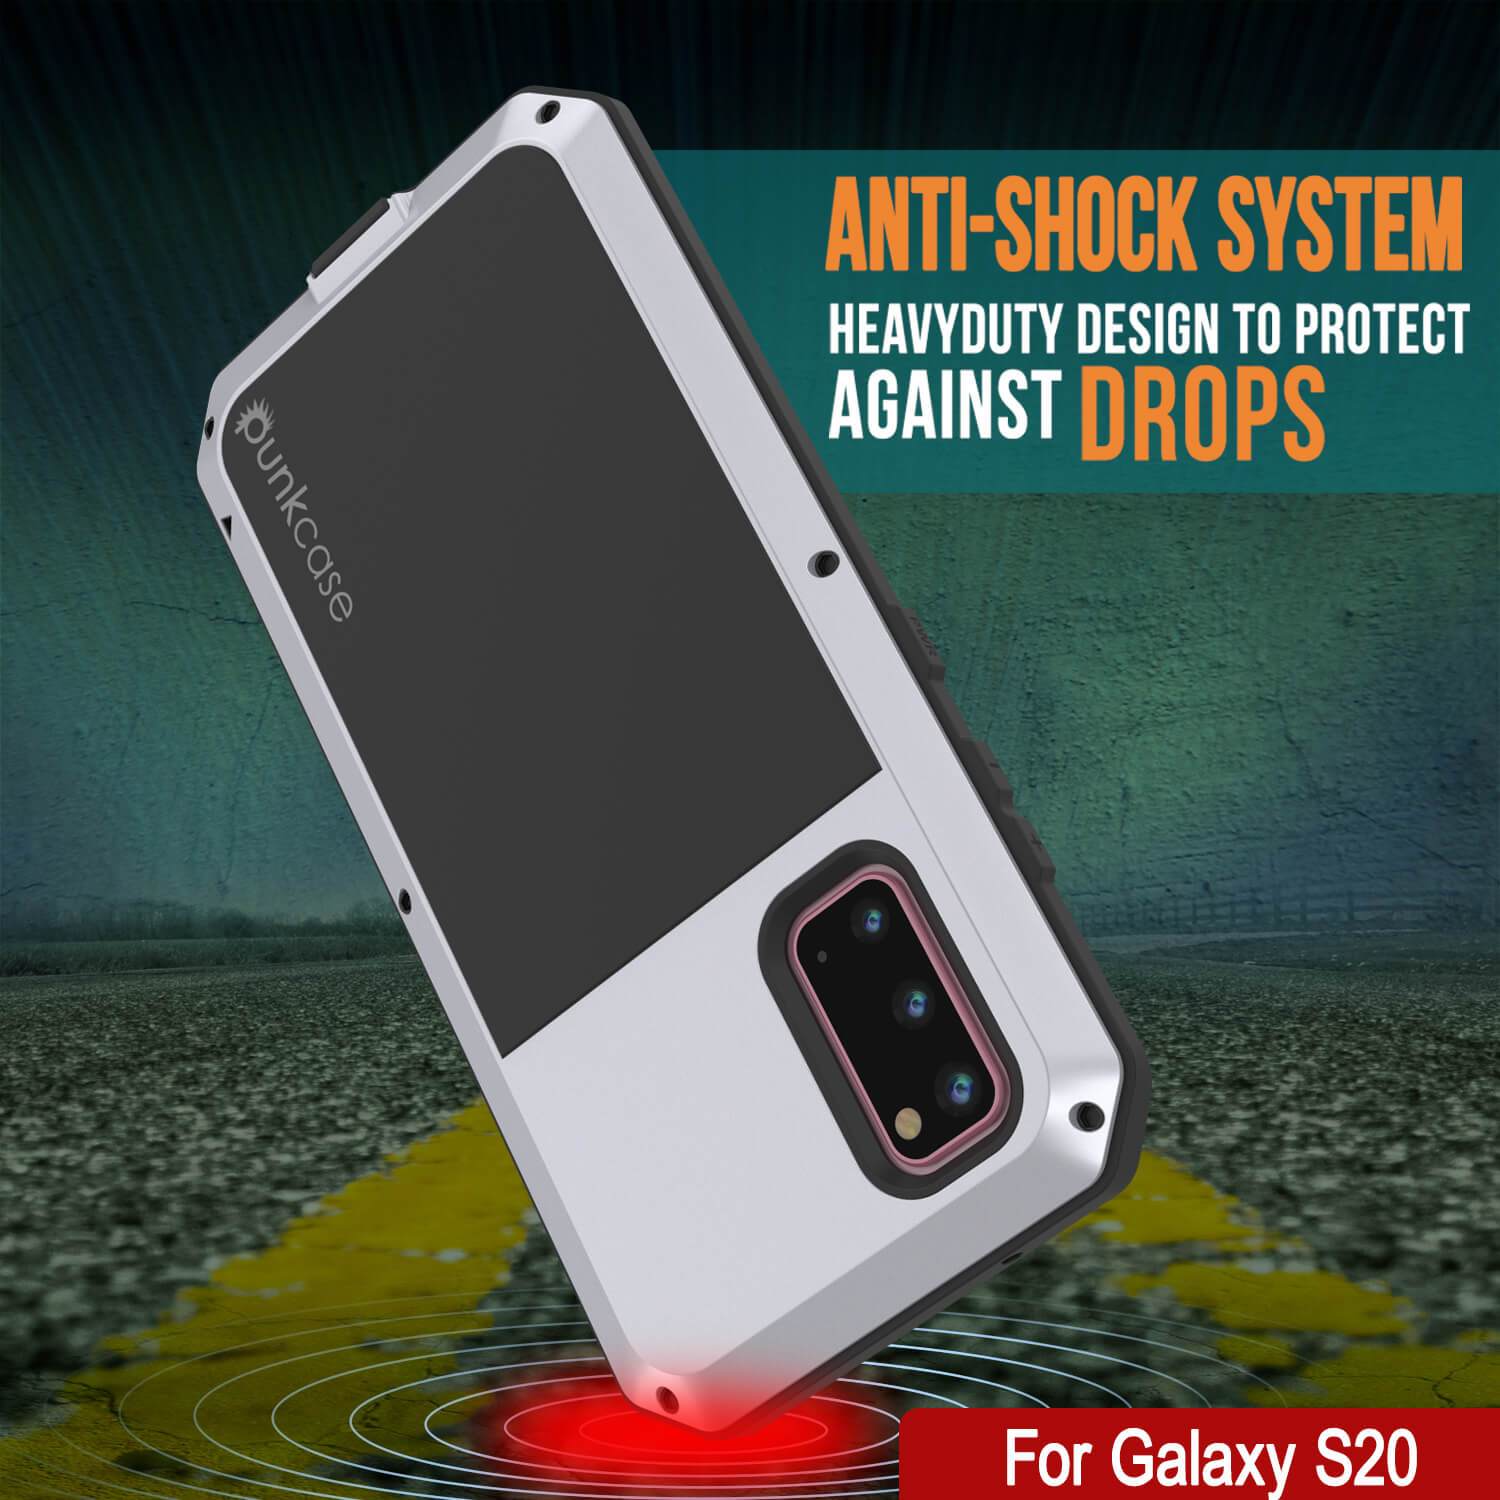 Galaxy s20 Metal Case, Heavy Duty Military Grade Rugged Armor Cover [White]